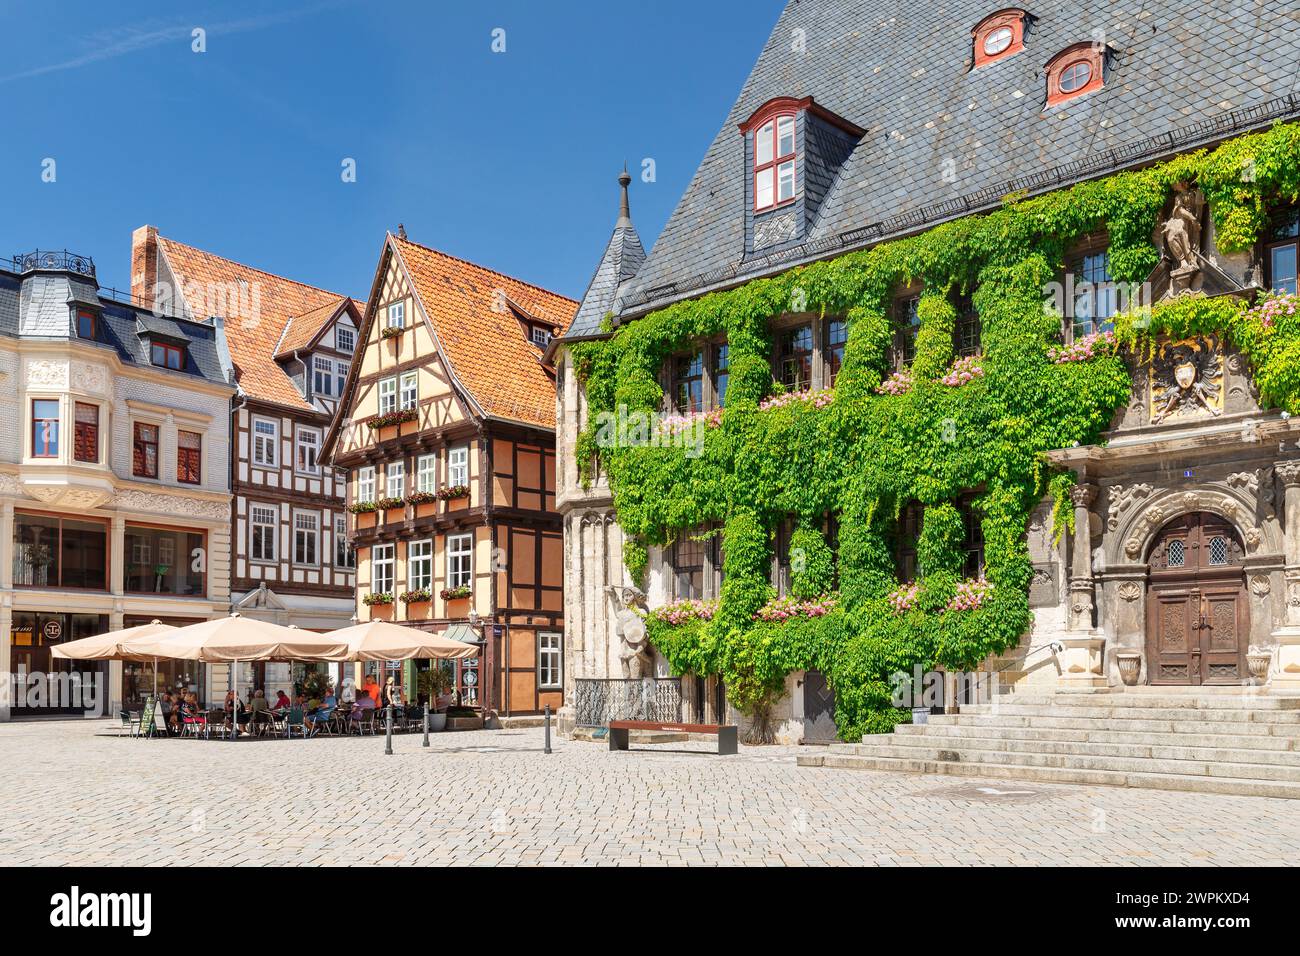 Market Place with Town Hall, Quedlinburg, Harz, Saxony-Anhalt, Germany, Europe Stock Photo